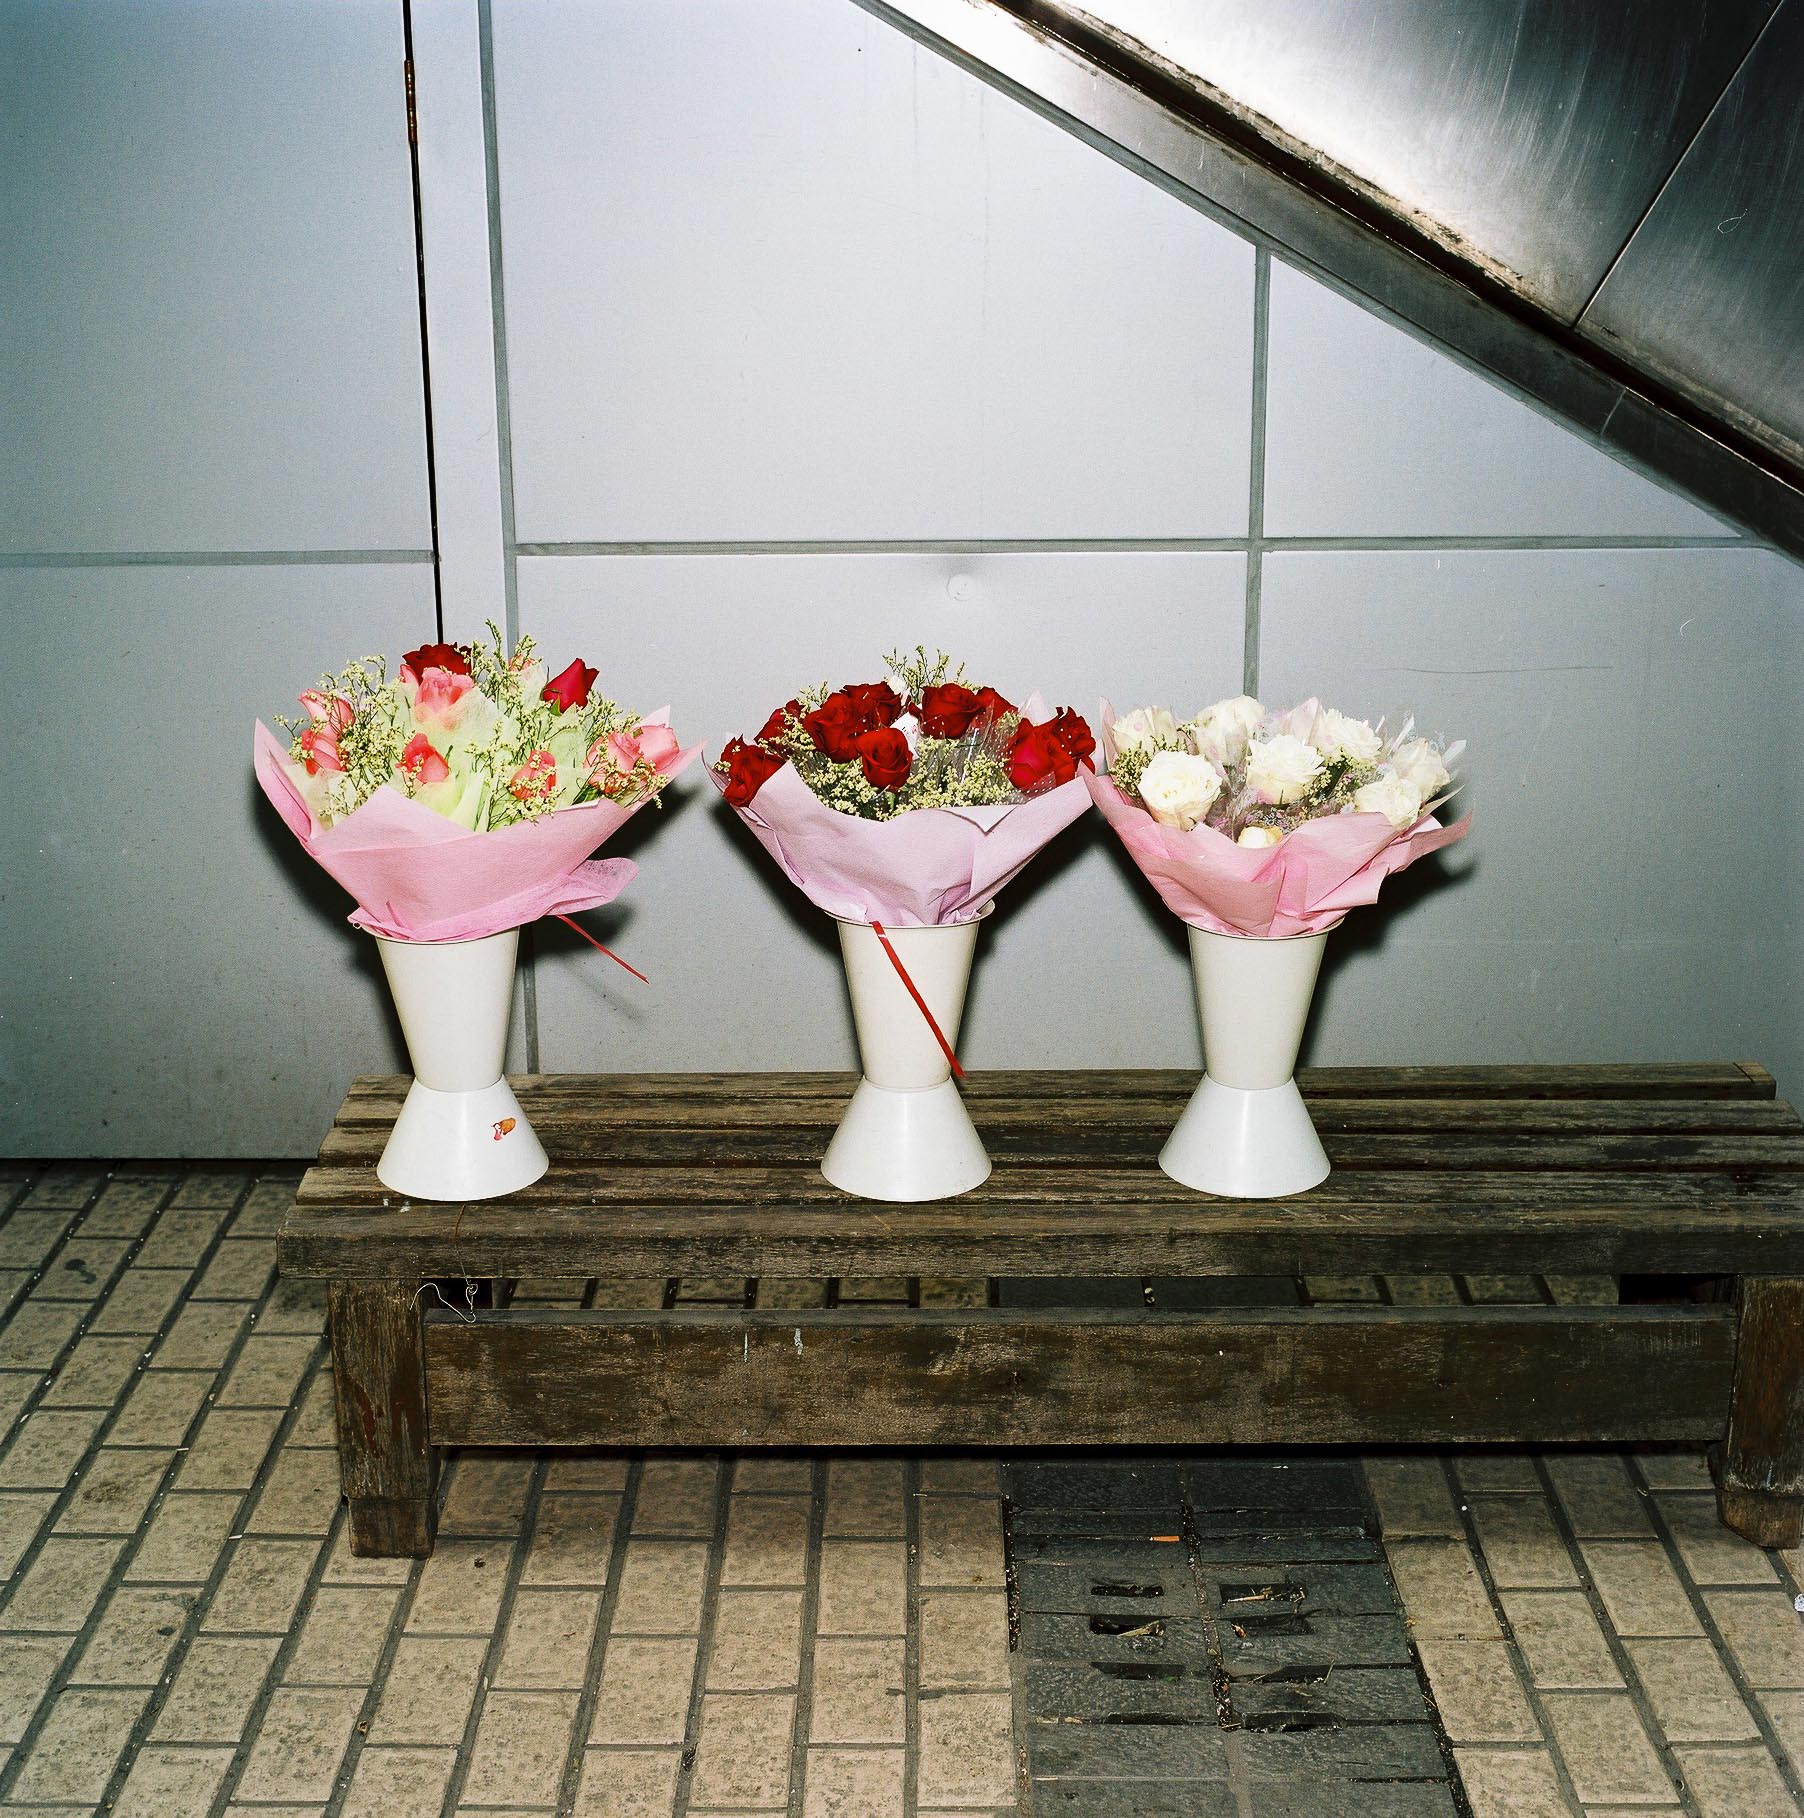 Three flower bouquets  wrapped in cellophane lined up on a wooden bench in front of an elevator. 